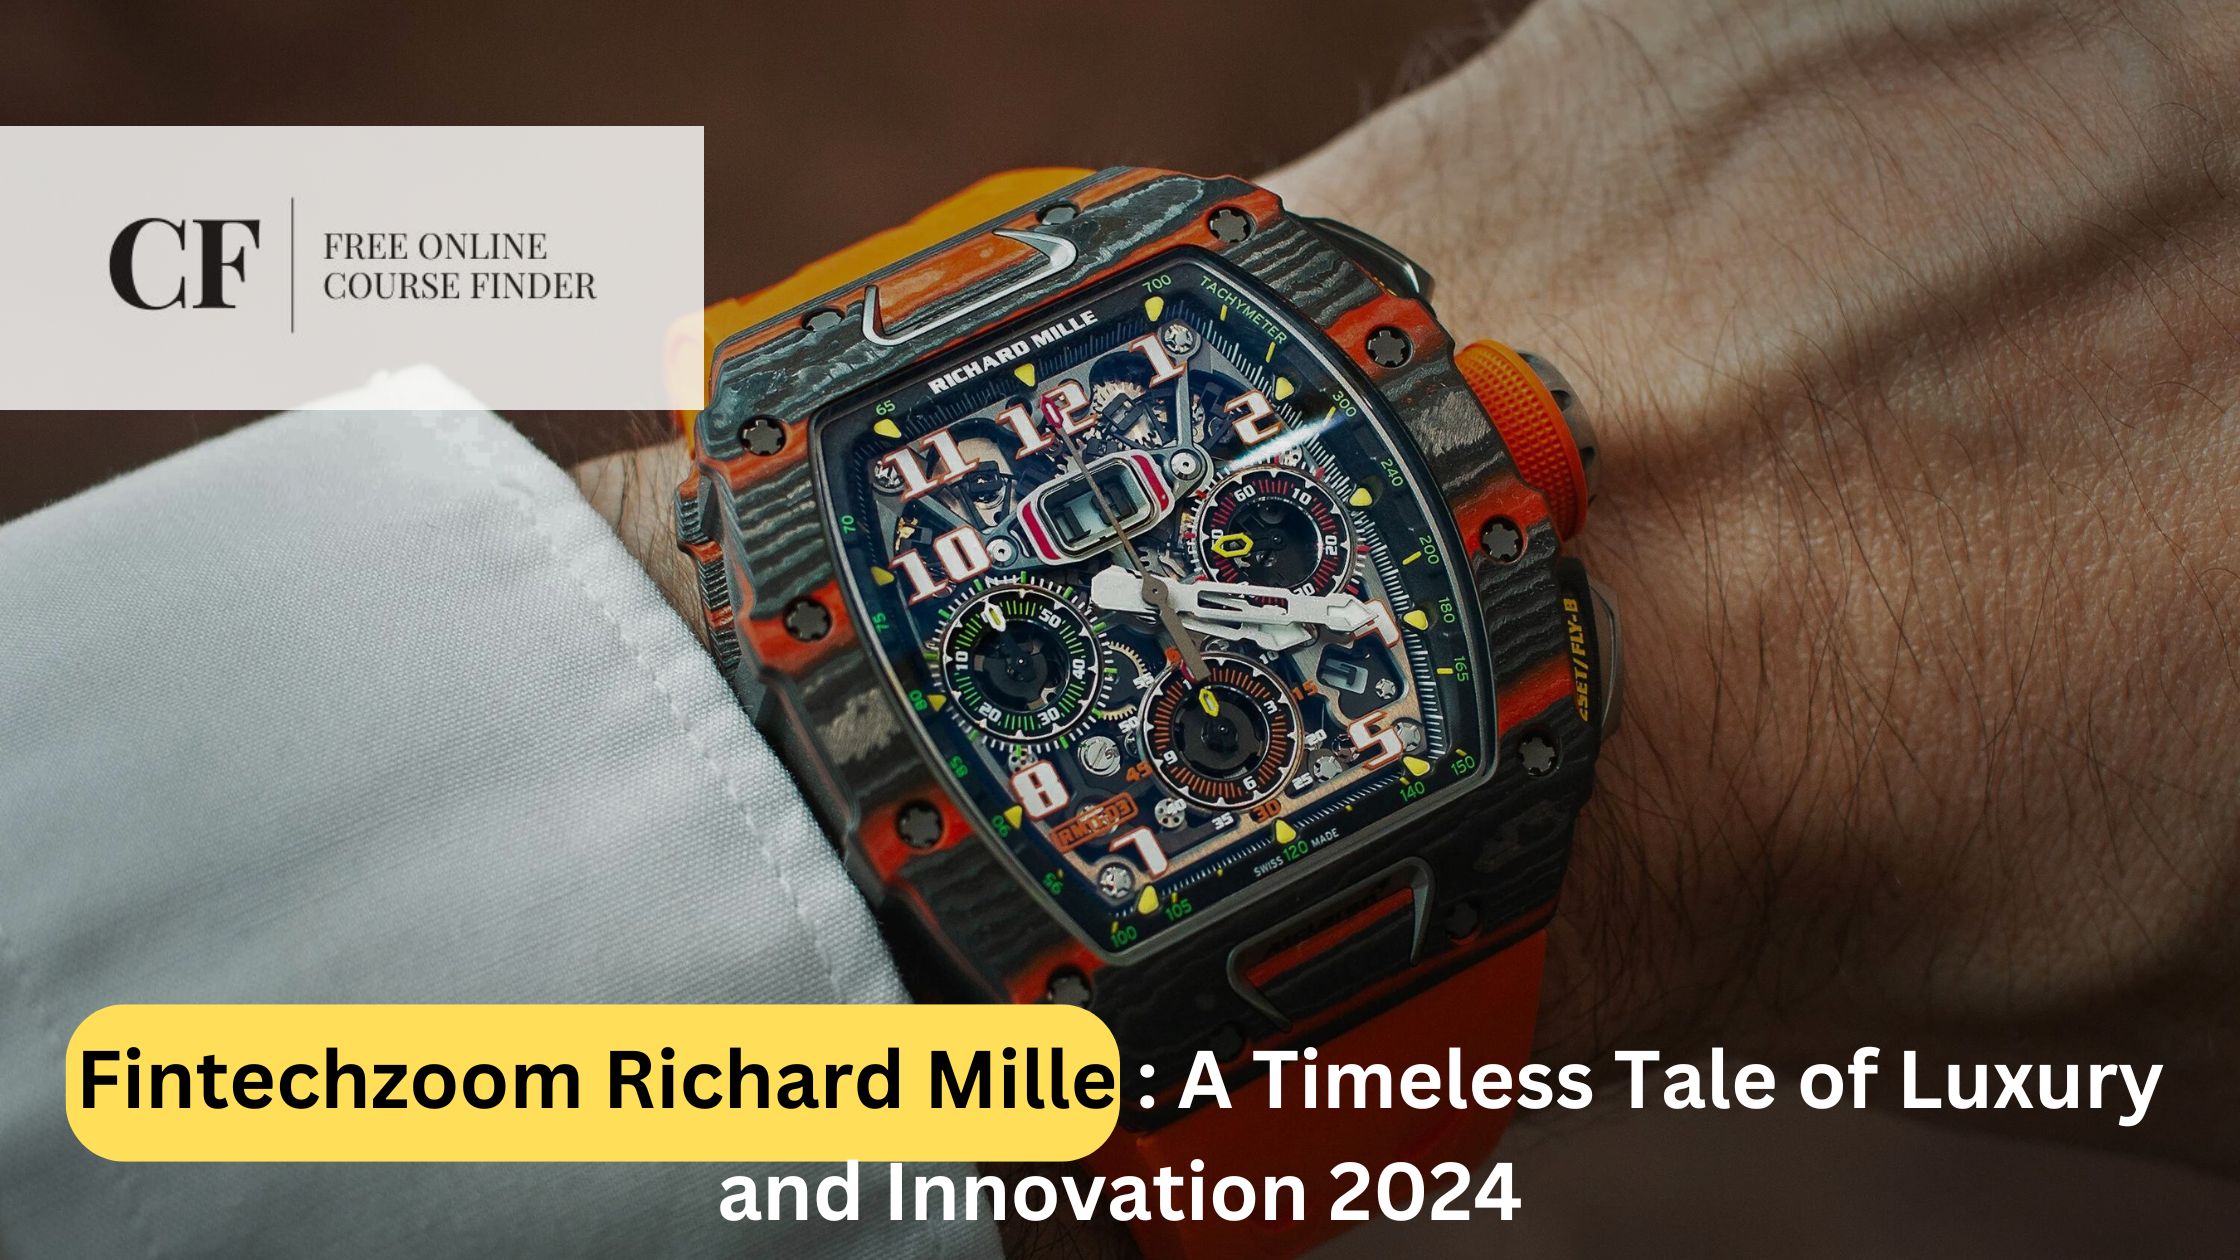 Fintechzoom Richard Mille: A Timeless Tale of Luxury and Innovation 2024